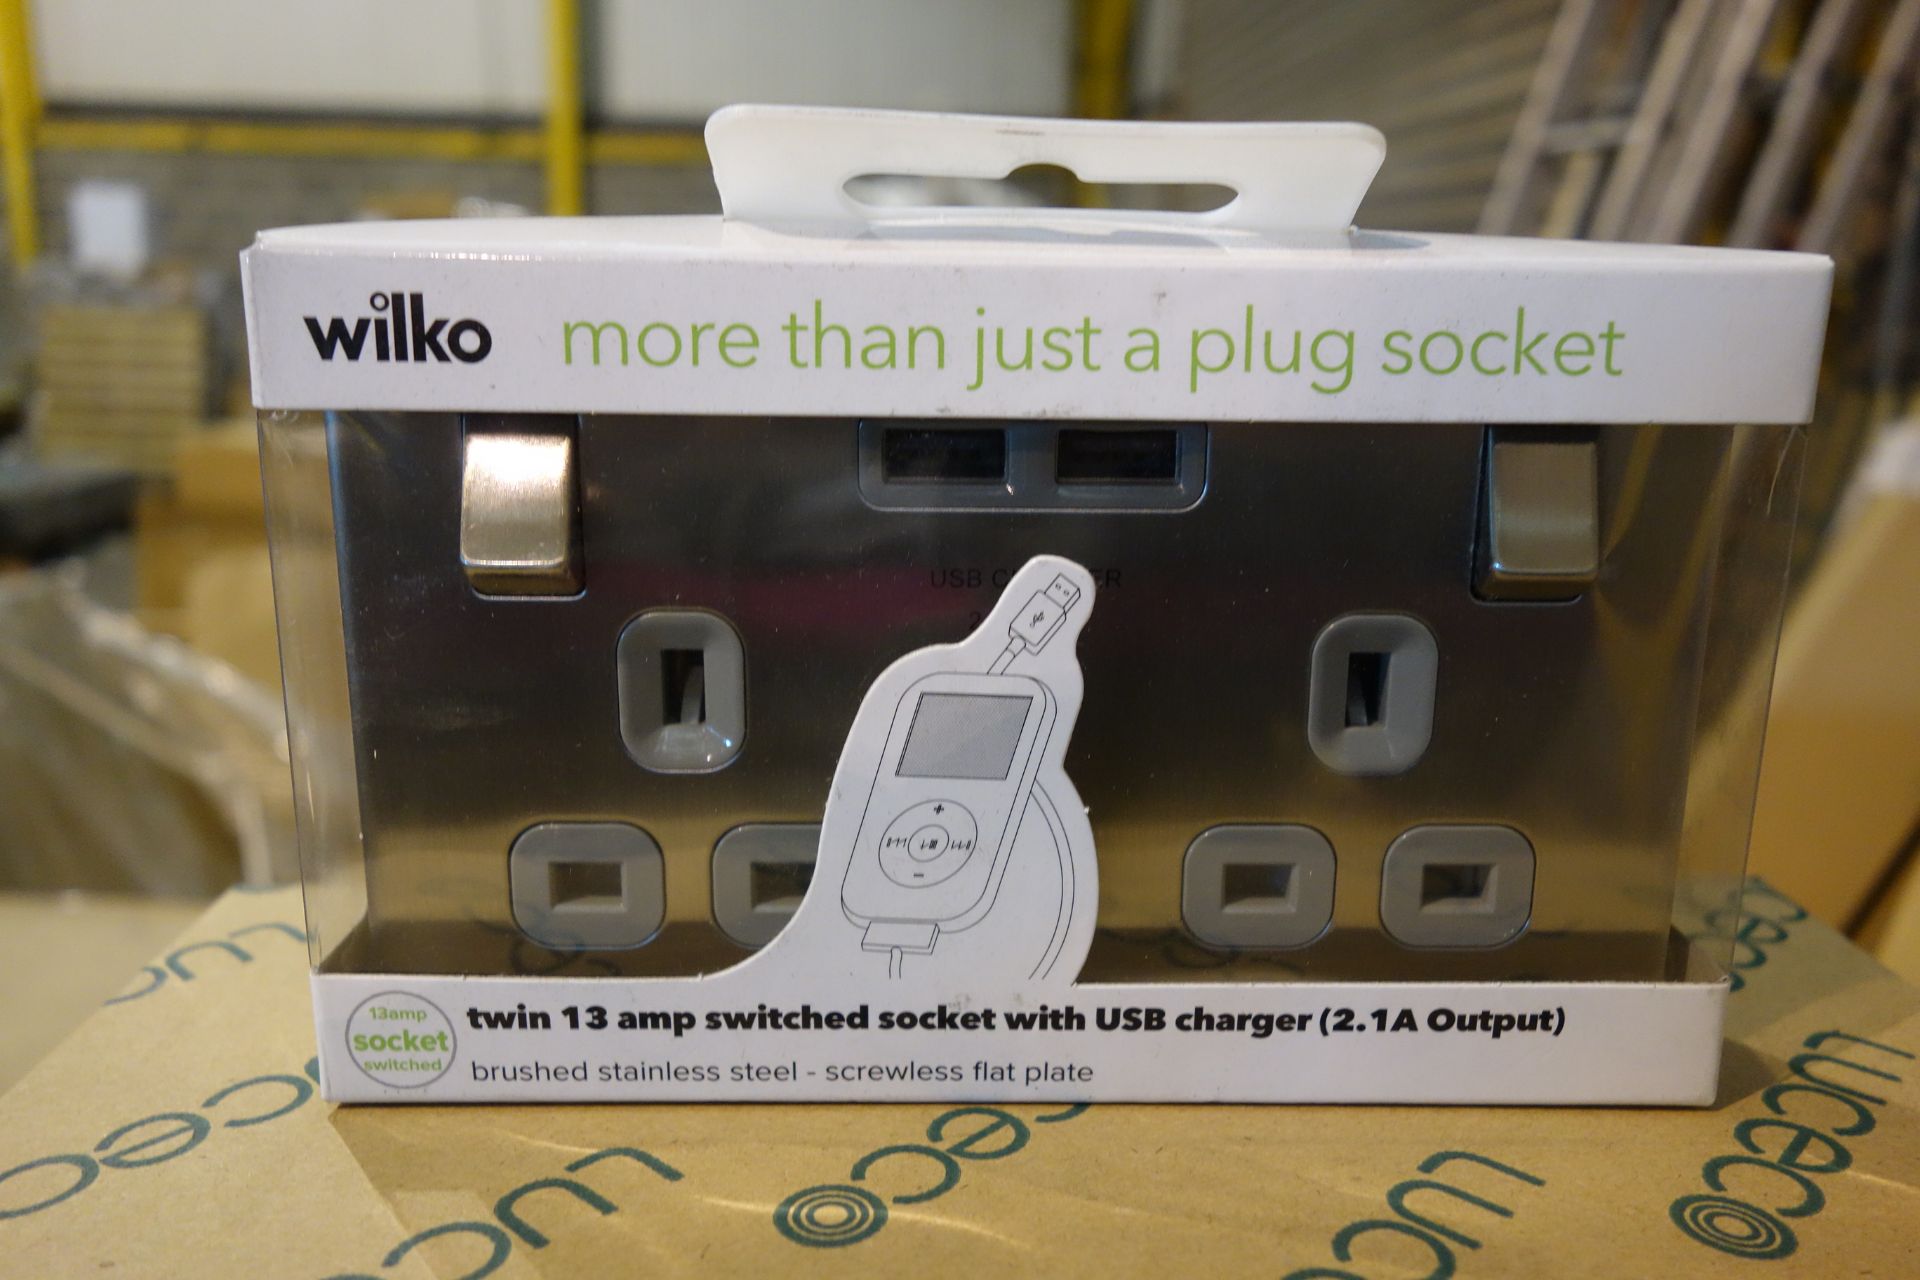 10 X Wilko 13AMP 2G Switched Socket With 2 X USB Charges 2.1A Output Brushed Stainless Steel Grey